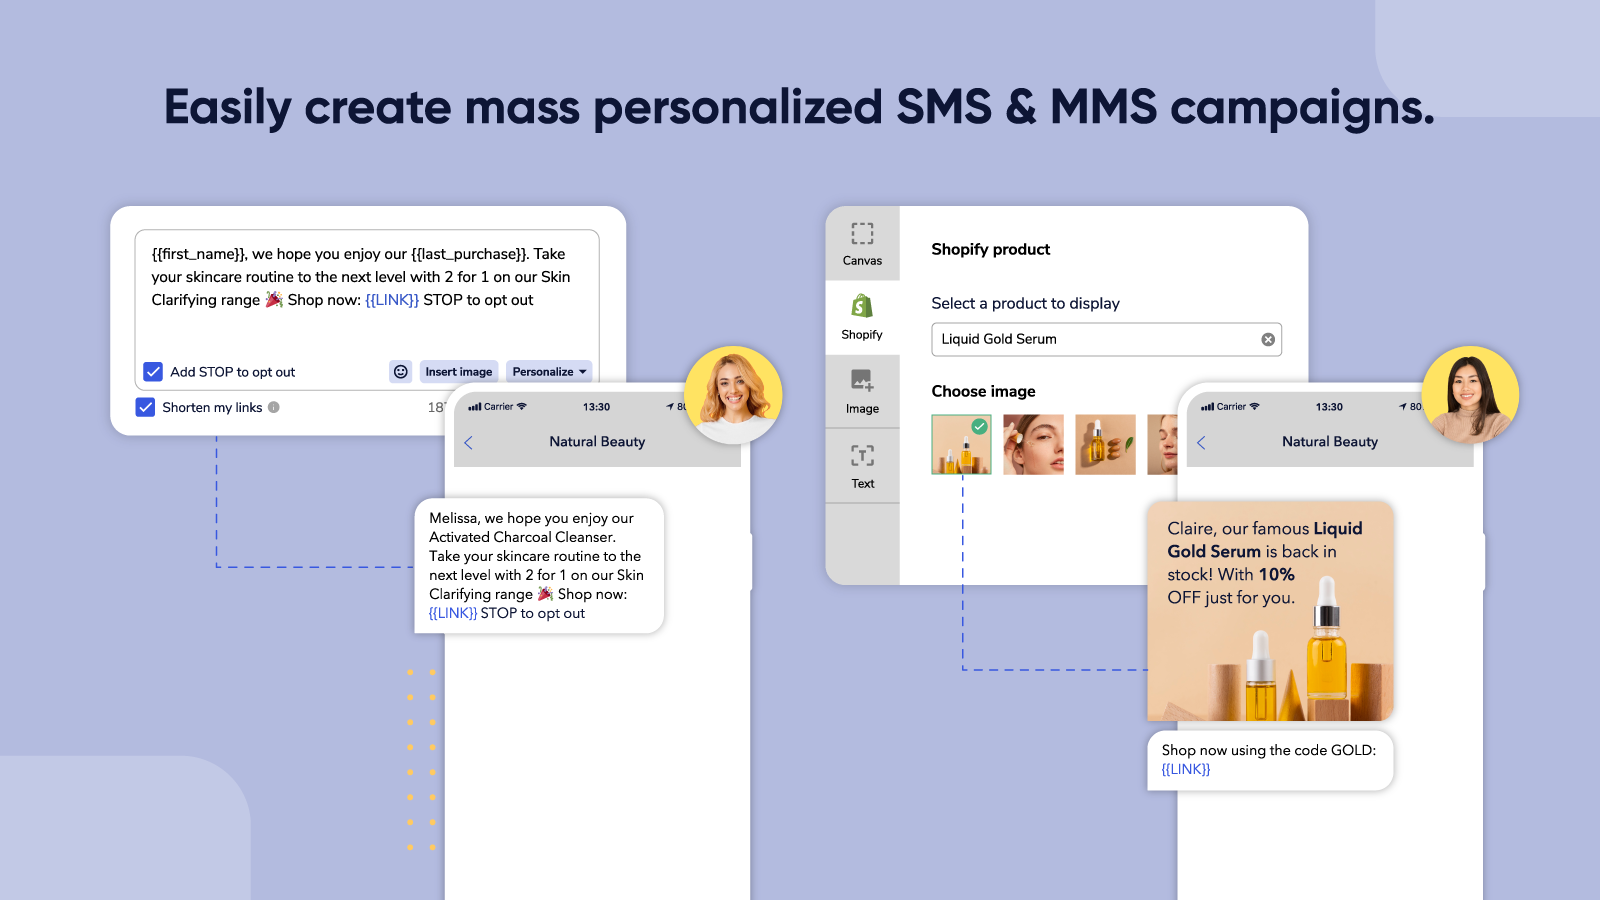 Easily create mass personalized SMS and MMS campaigns